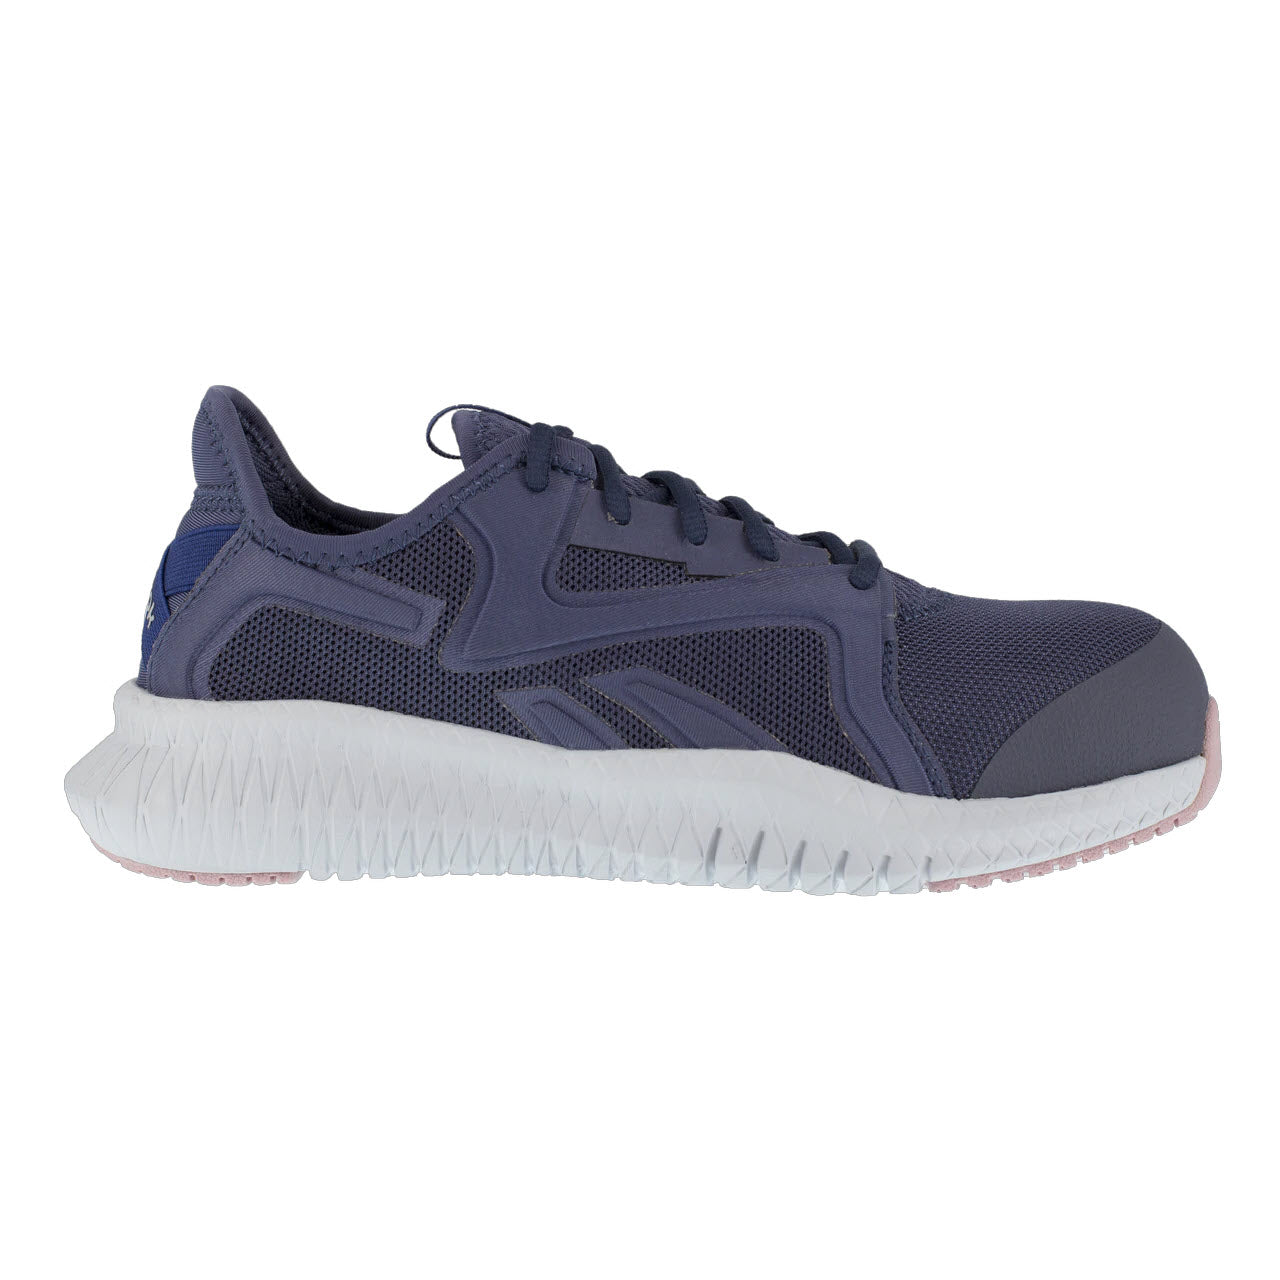 A single navy blue Reebok Work CT Flexagon 3.0 athletic sneaker with a white sole and MemoryTech Memory Foam footbed.